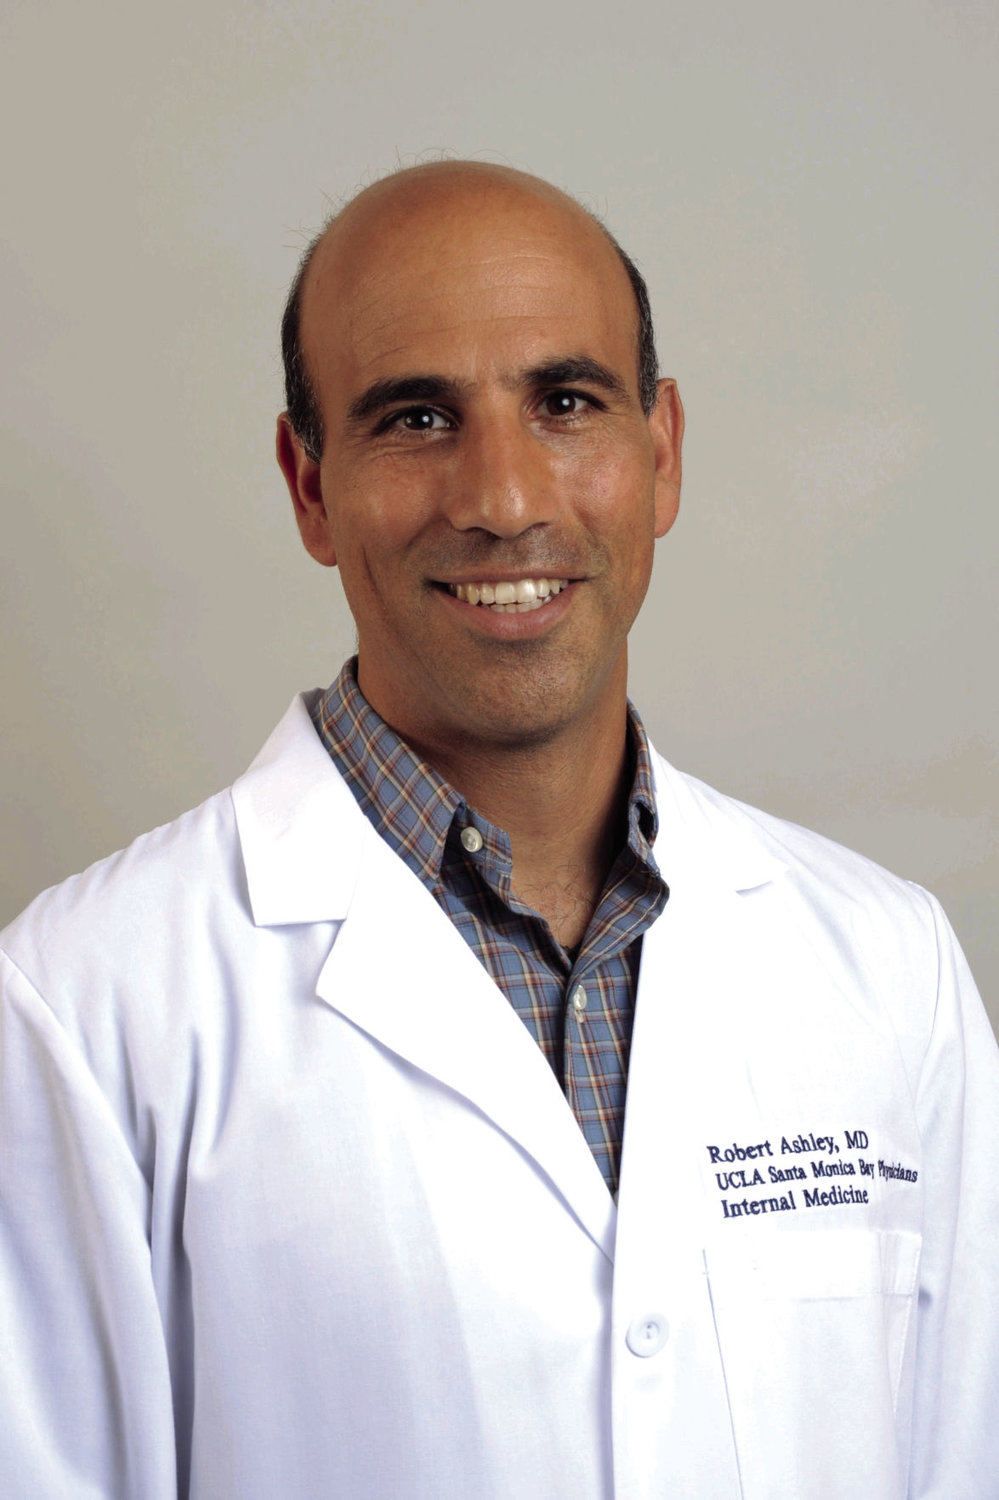 Robert Ashley, M.D., is an internist and assistant professor of medicine at the University of California, Los Angeles.